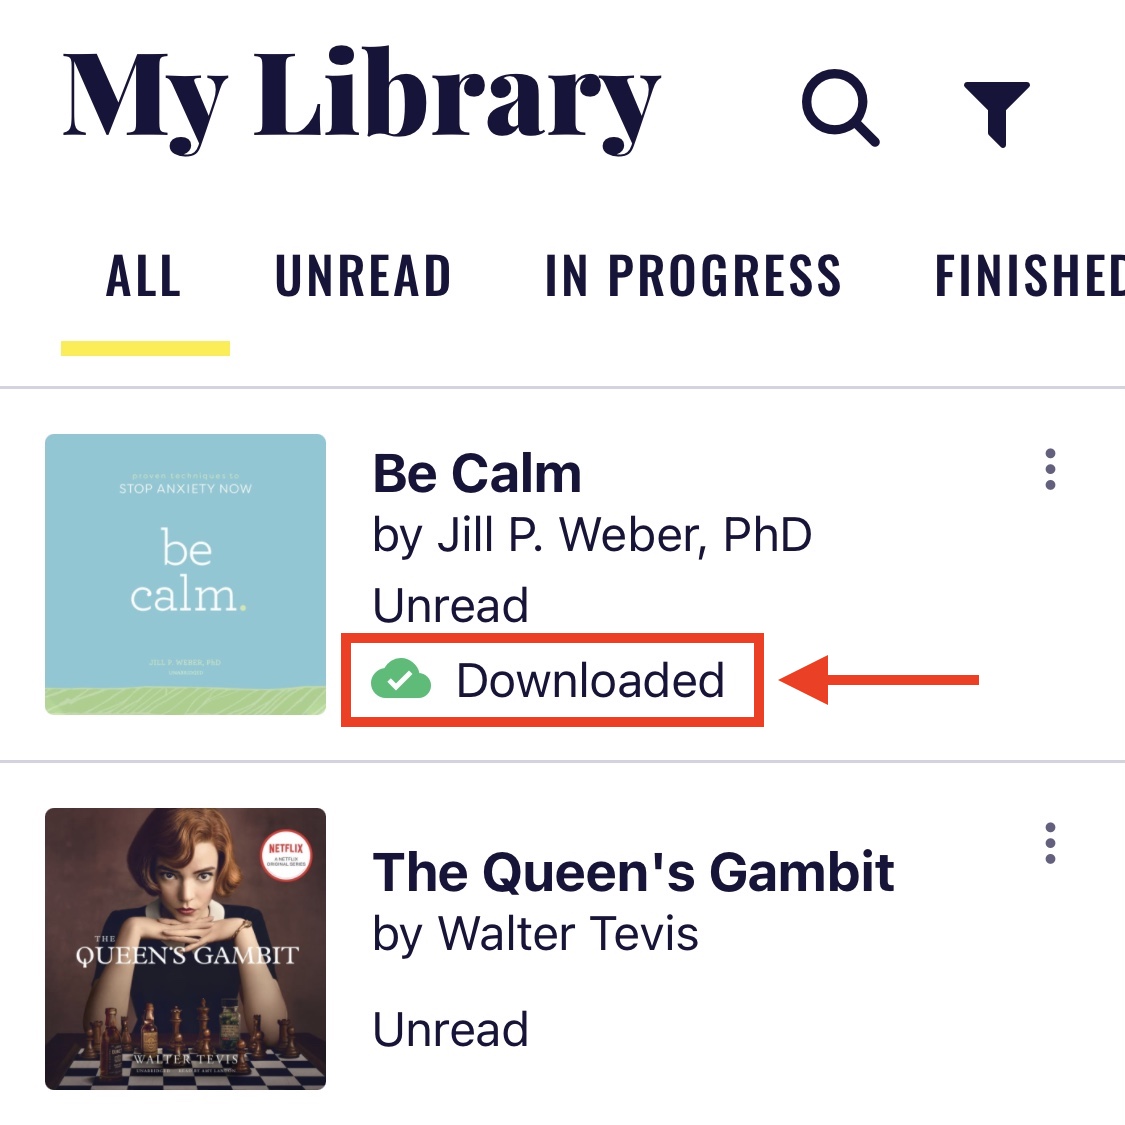 A book that's been downloaded successfully in the Chirp app